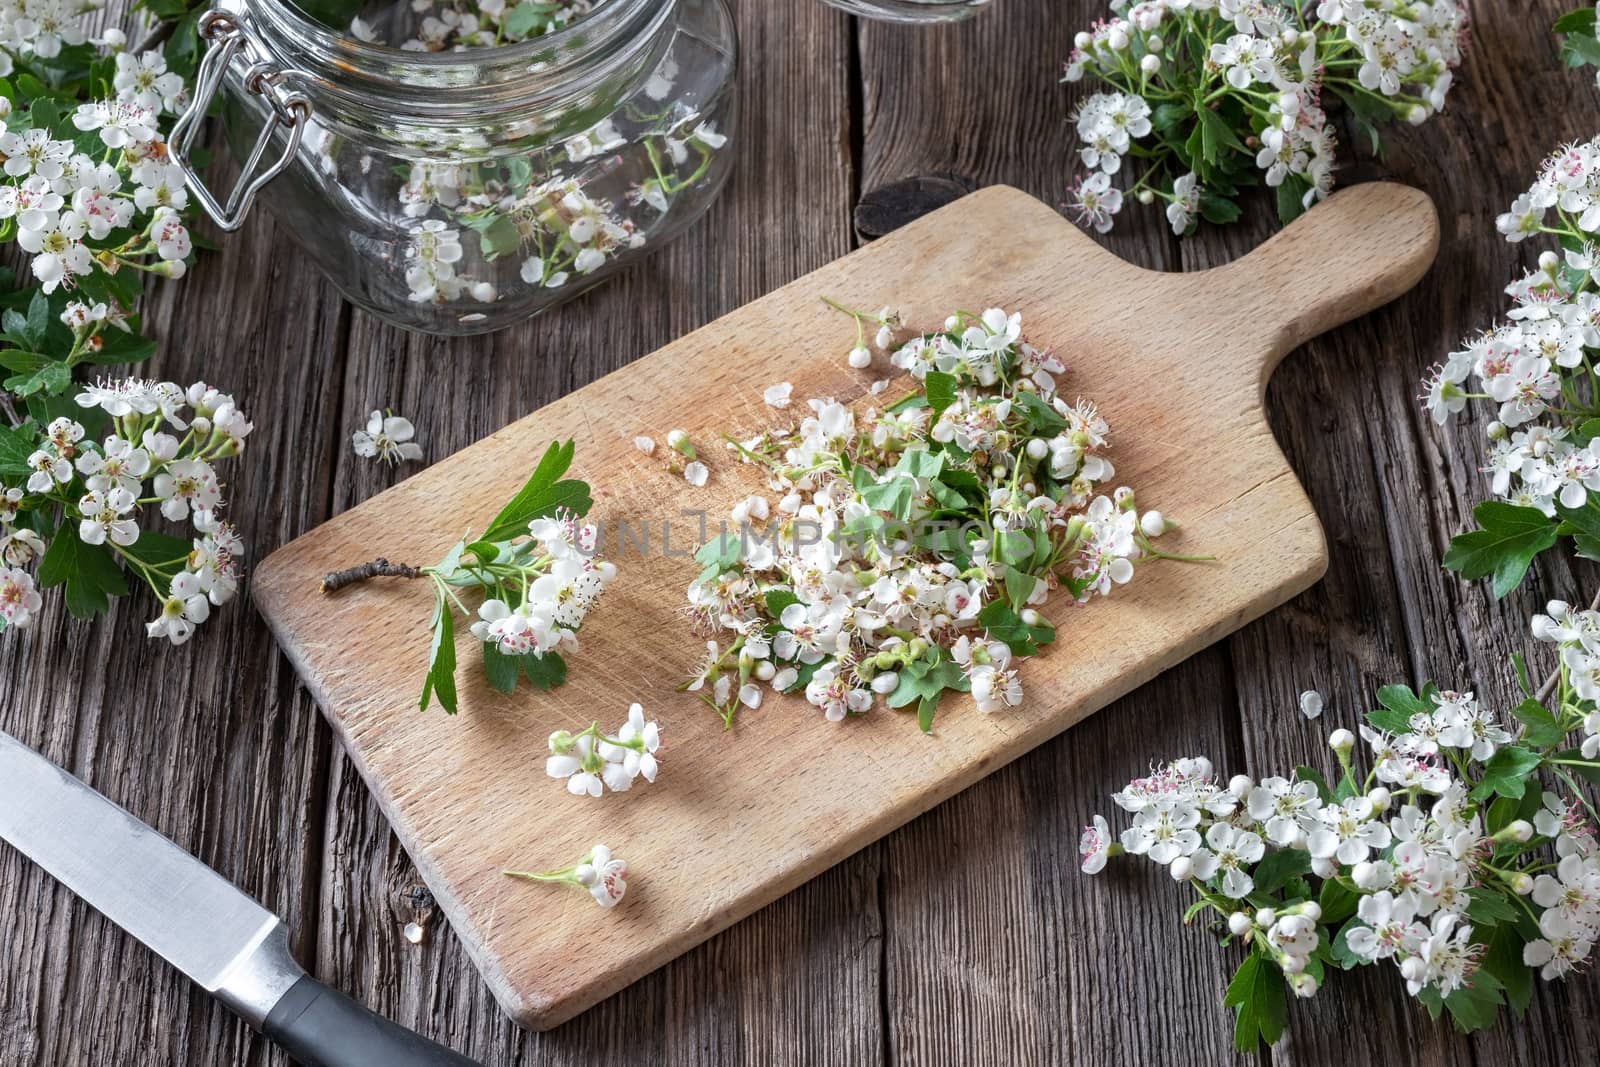 Cutting up hawthorn flowers to prepare homemade herbal tincture for the heart